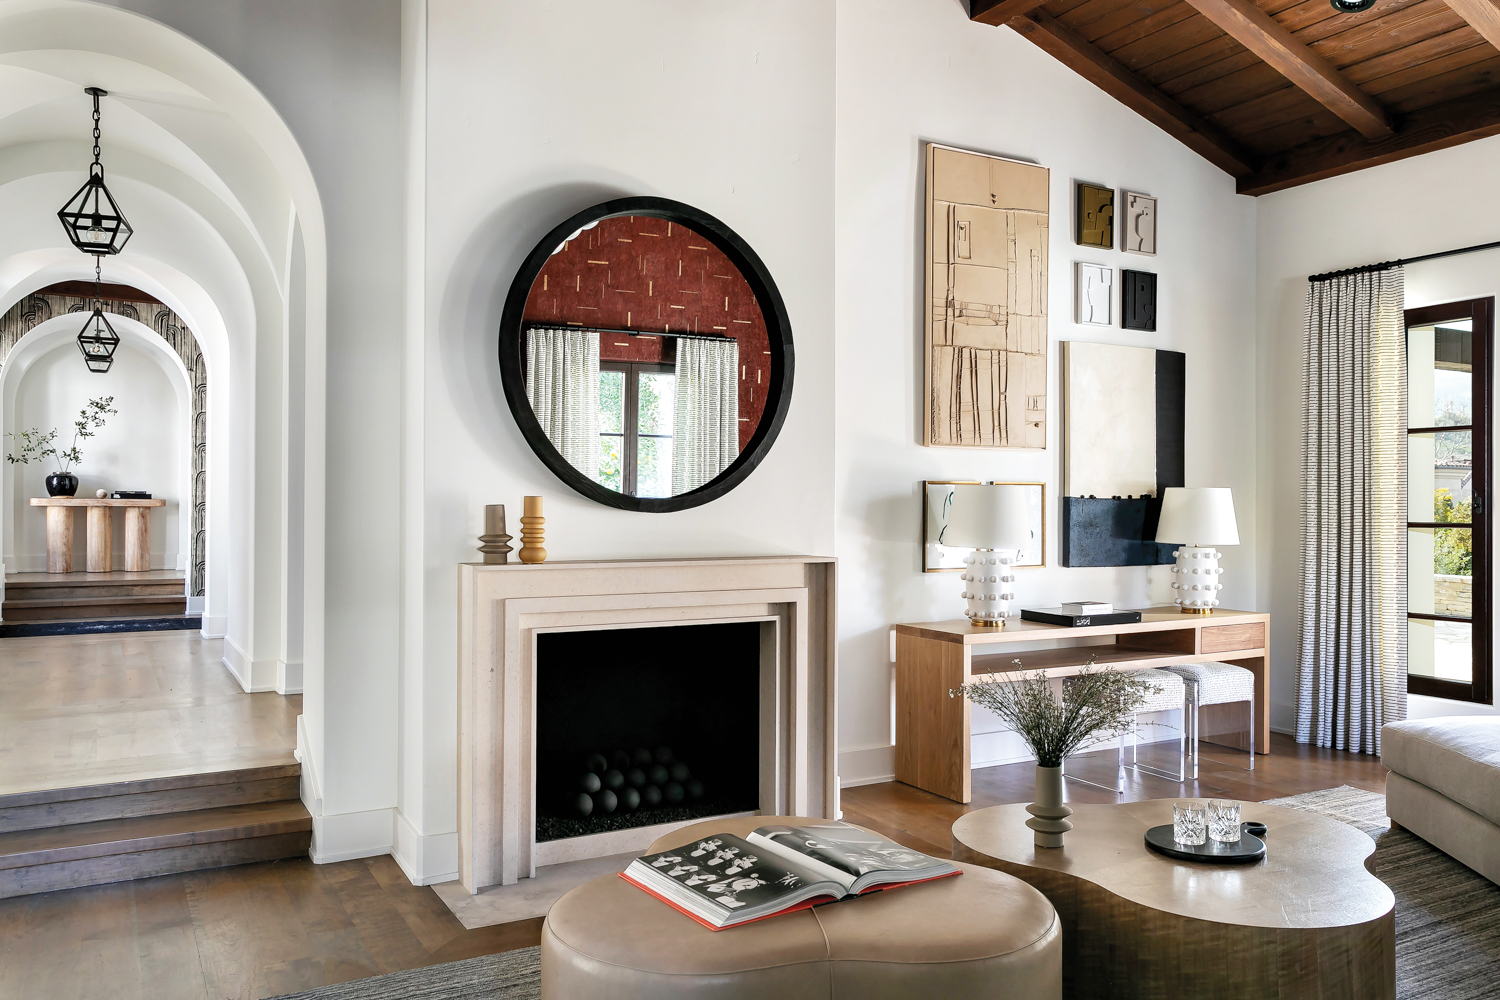 A Chic California Renovation Reimagines Spanish Colonial Style